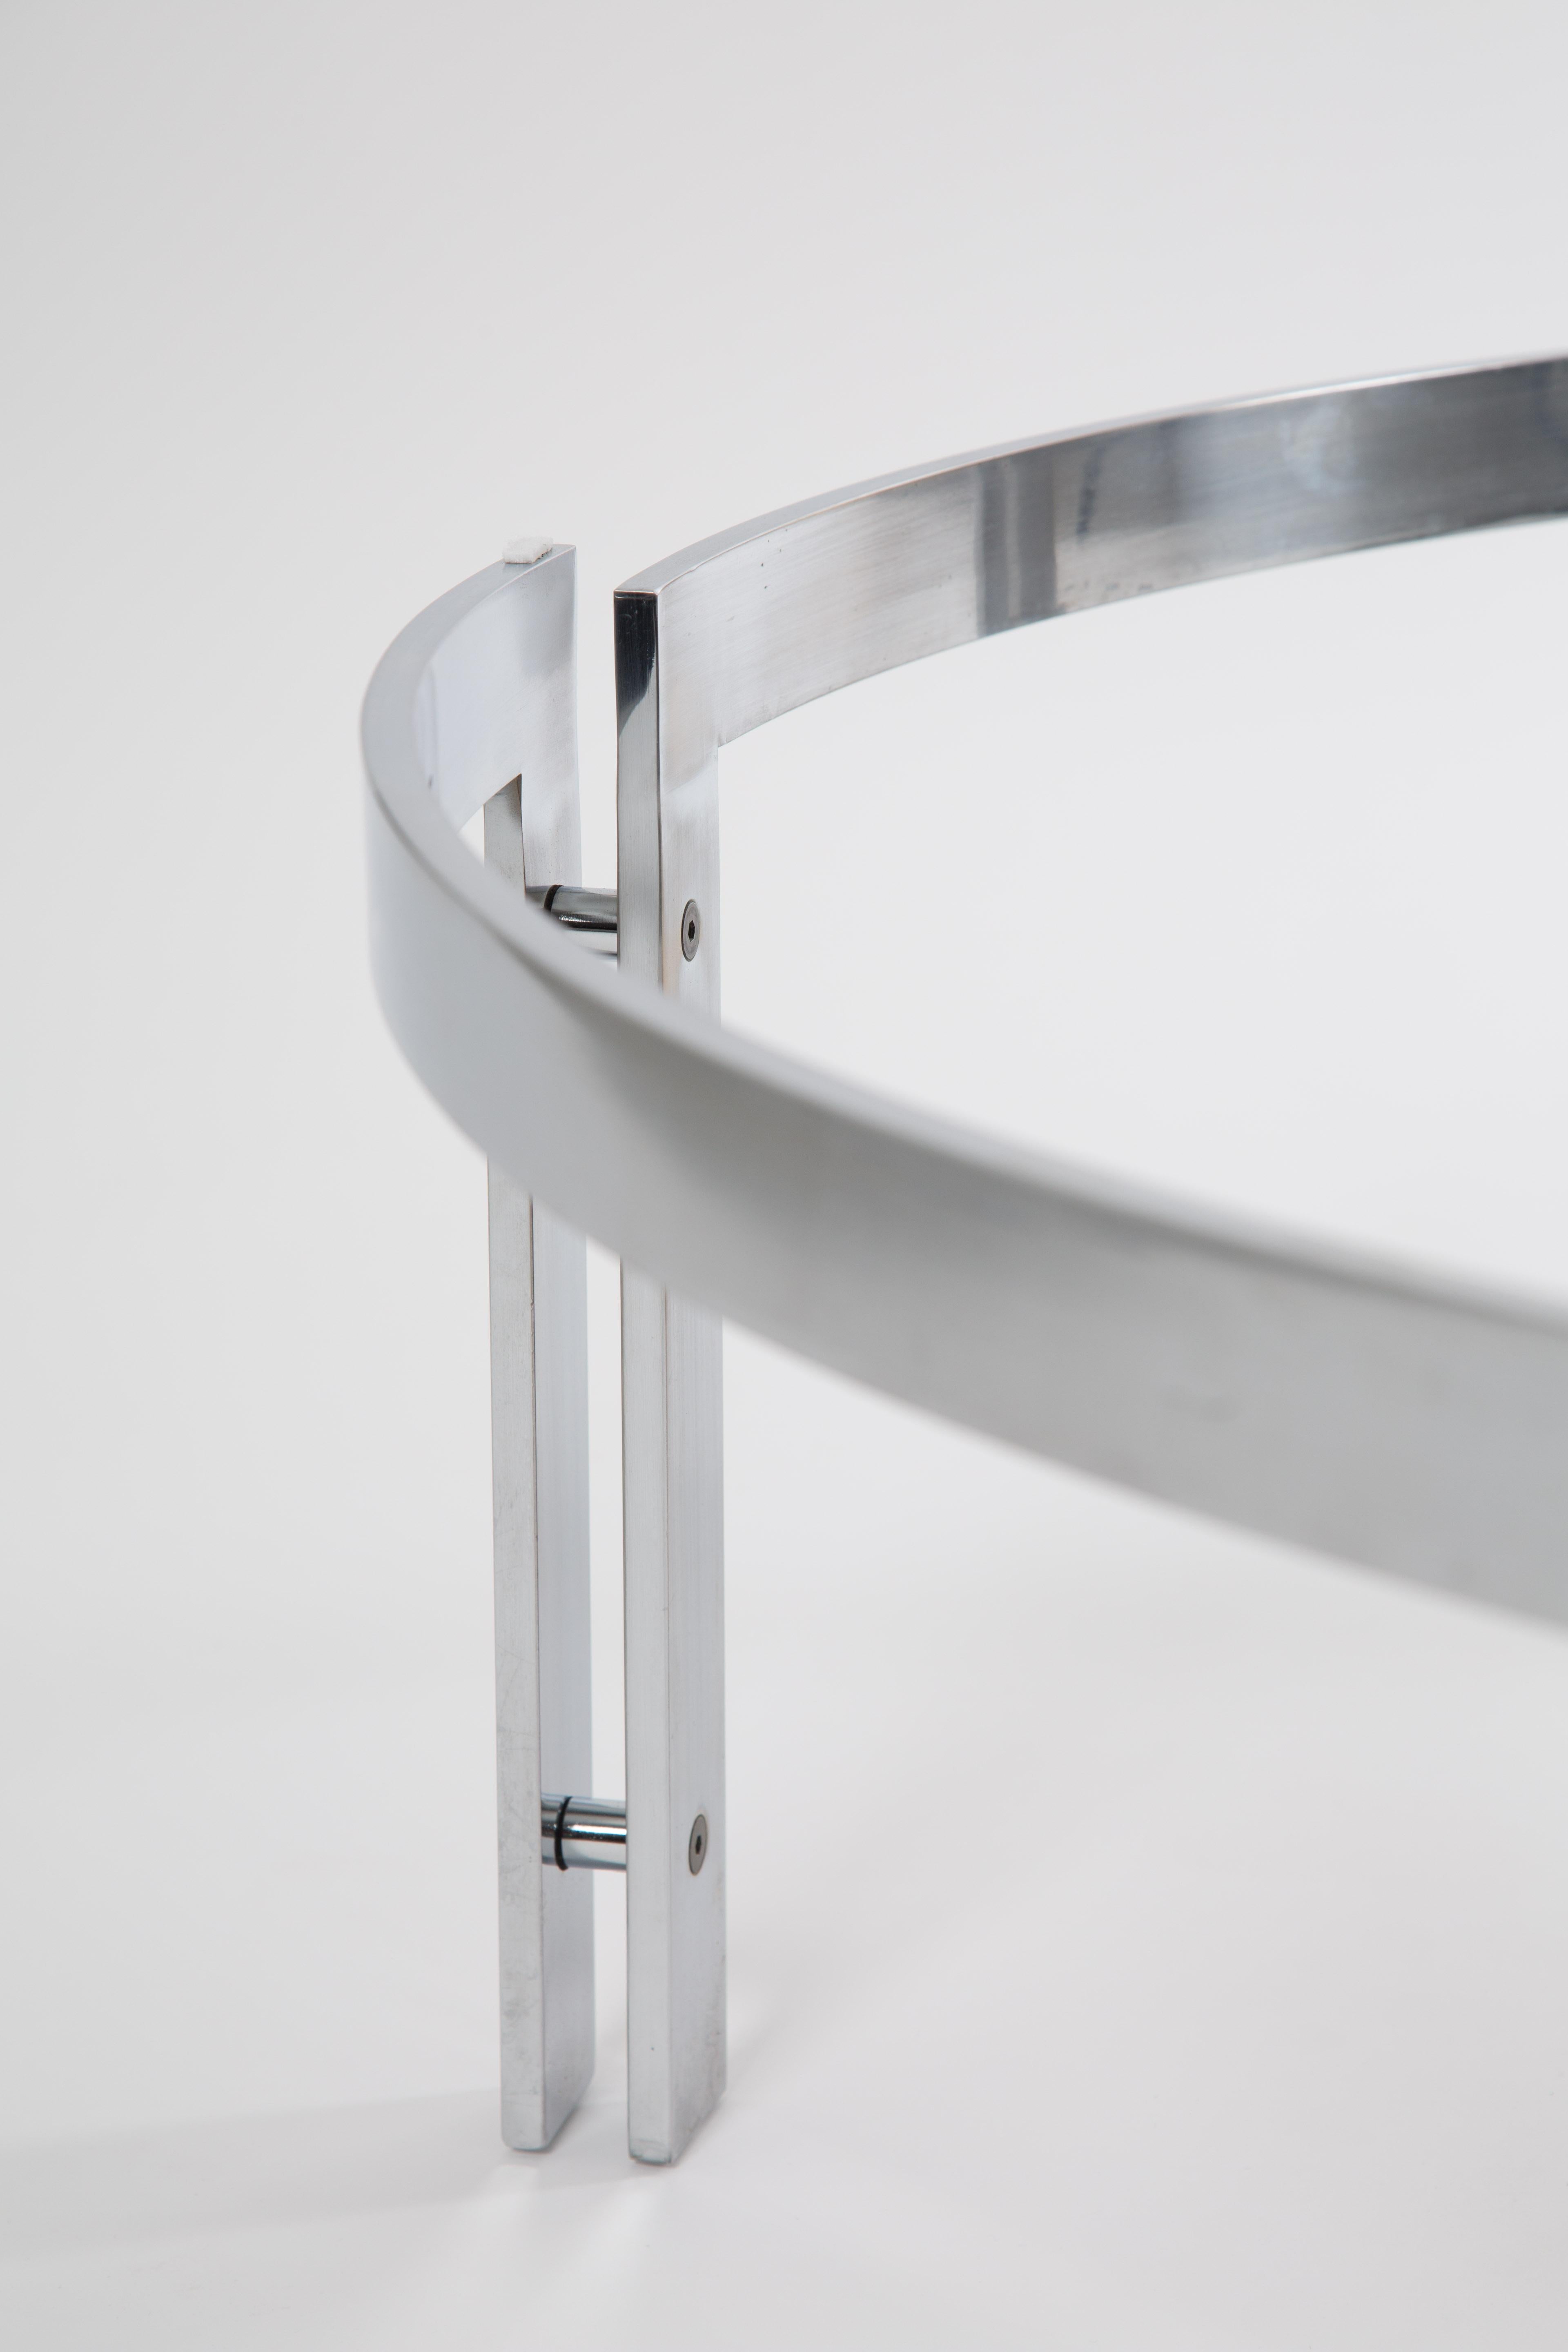 Metaform Round Glass Table with Steel Frame in the Style of Kjaerholm 2